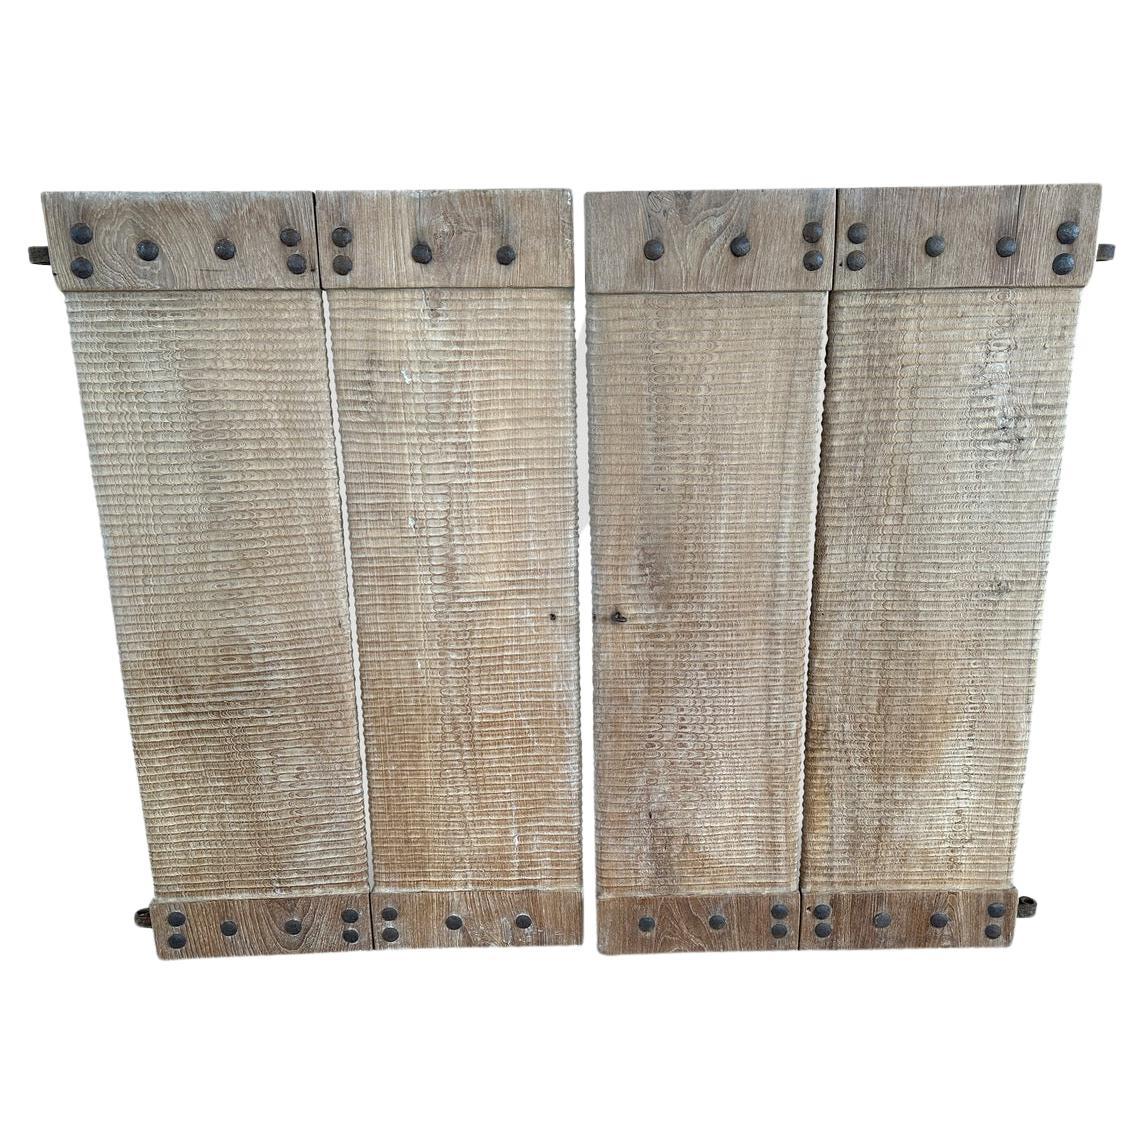 Andrianna Shamaris Century Old Shutters or Wall Hanging For Sale